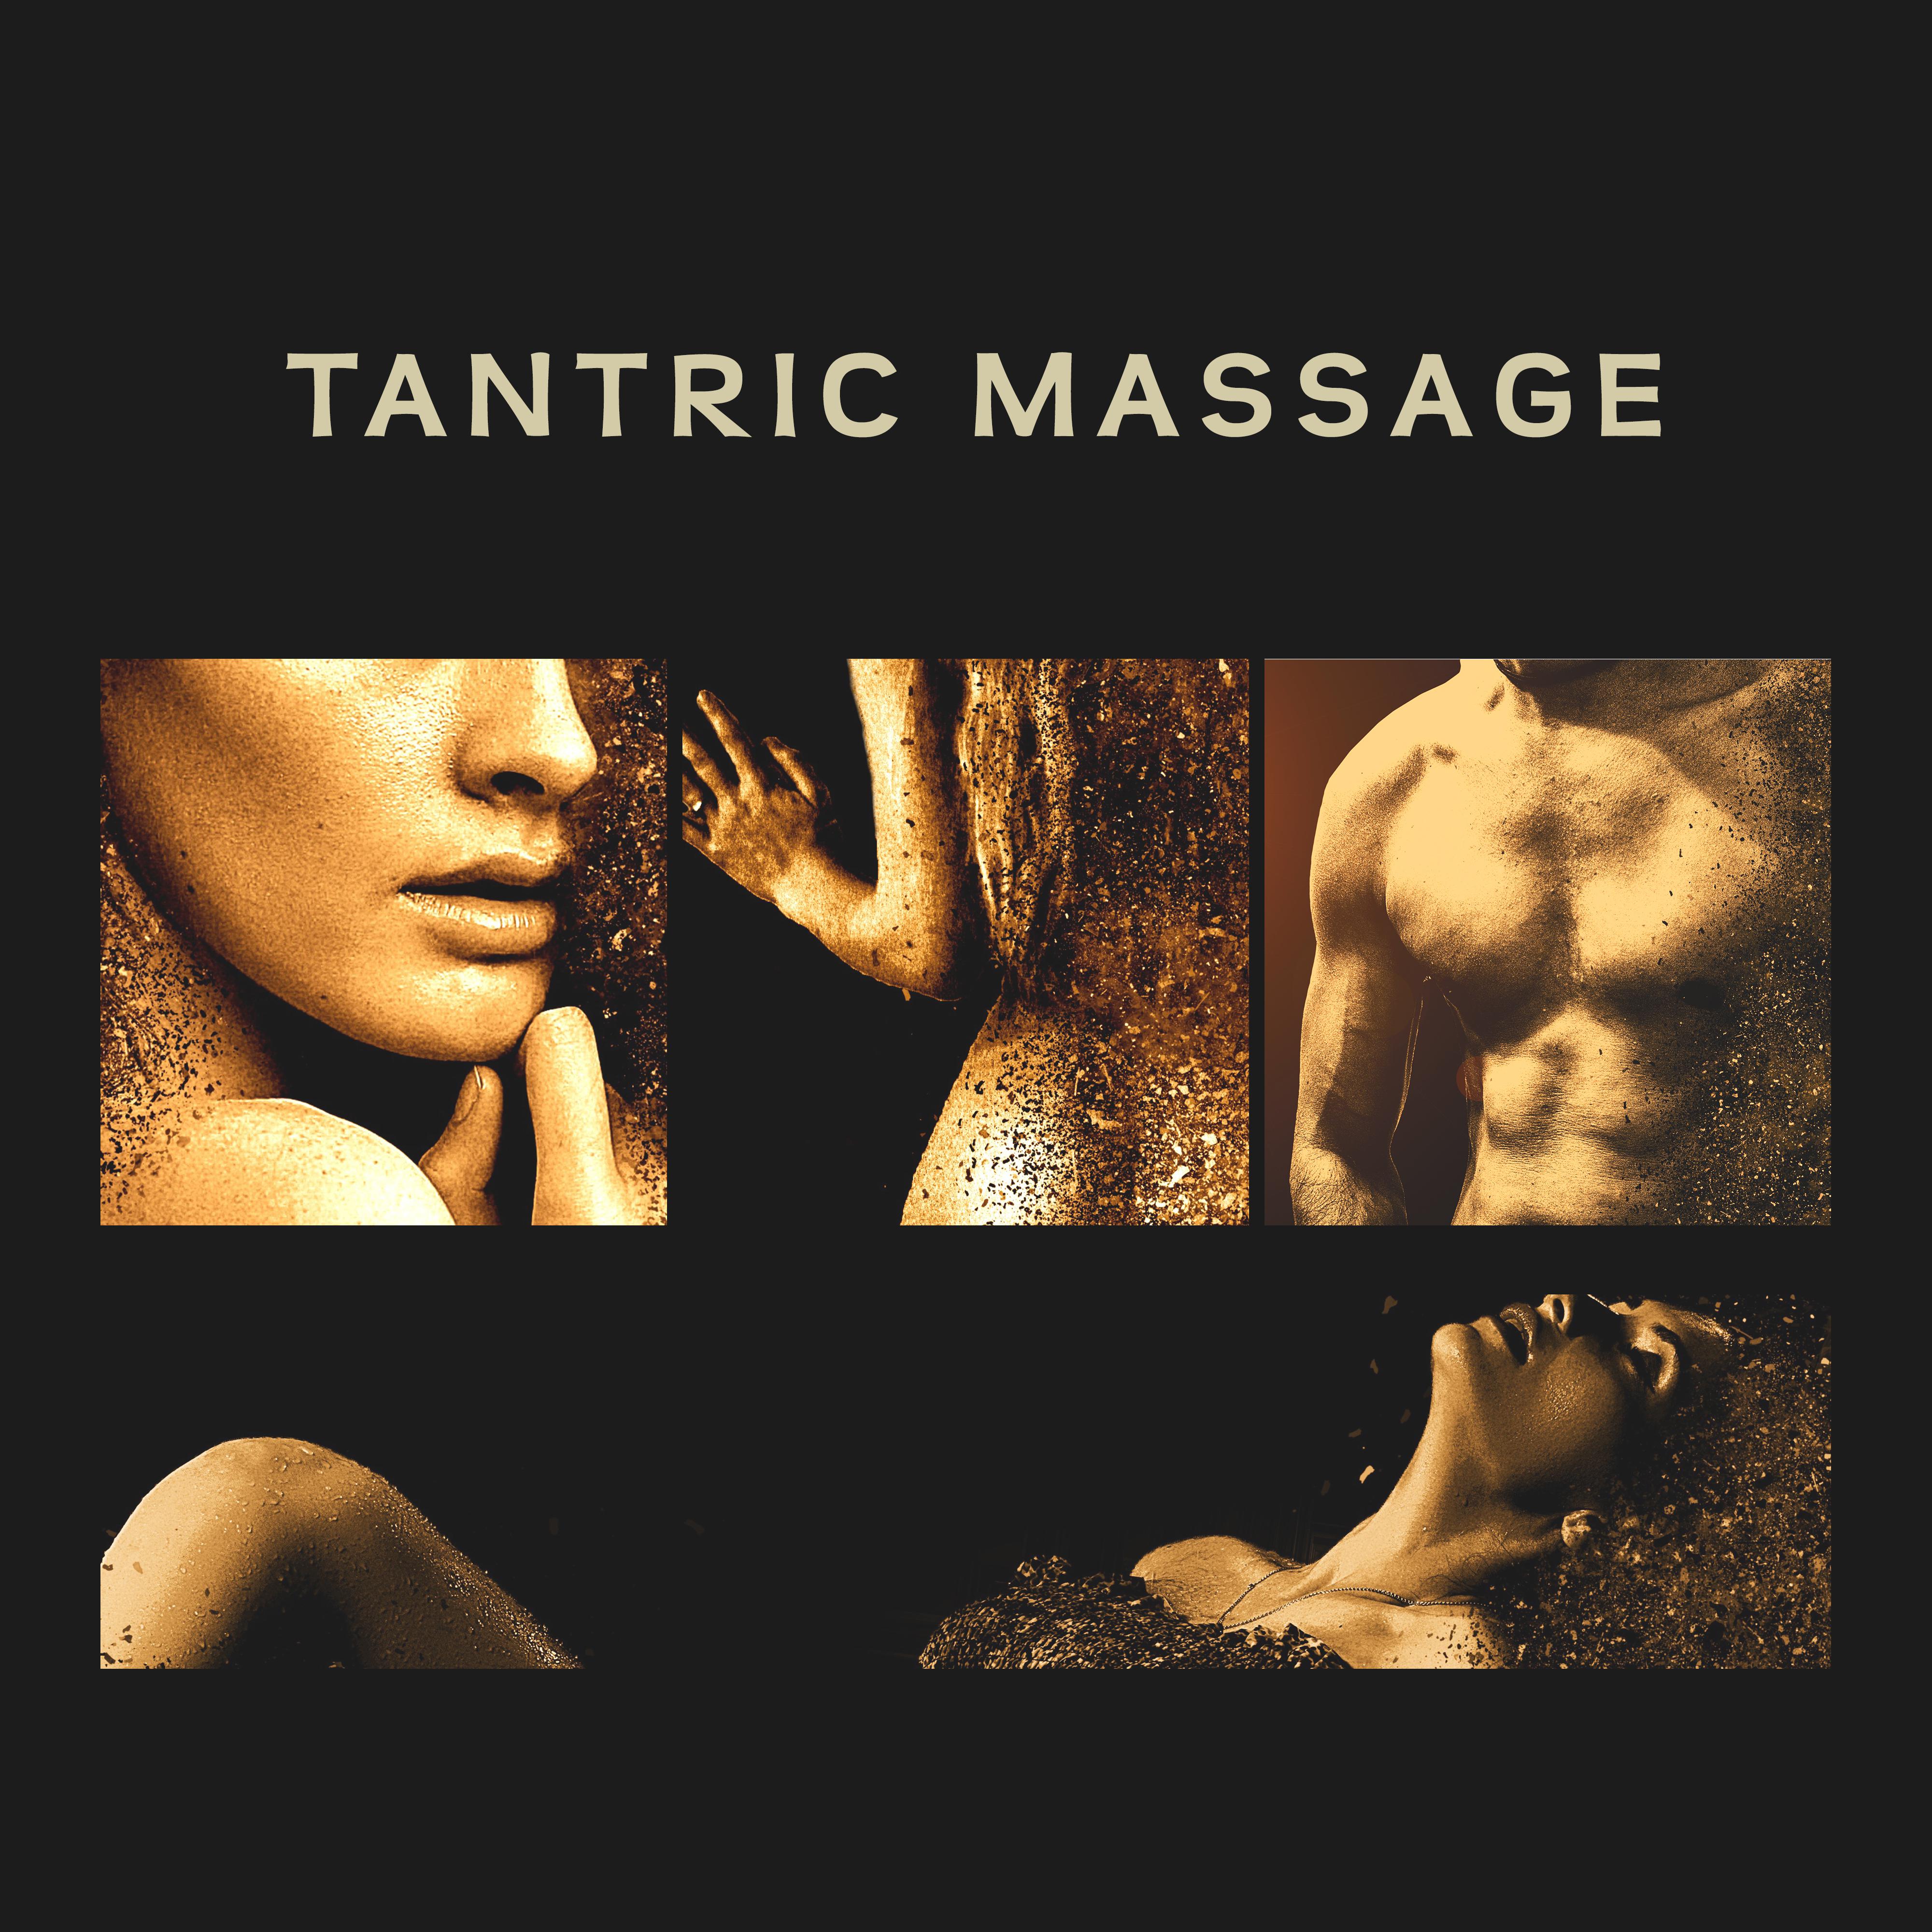 Tantric Massage  Relaxing Music, Tantra, Erotic Massage, Sexy Music, Nature Sounds